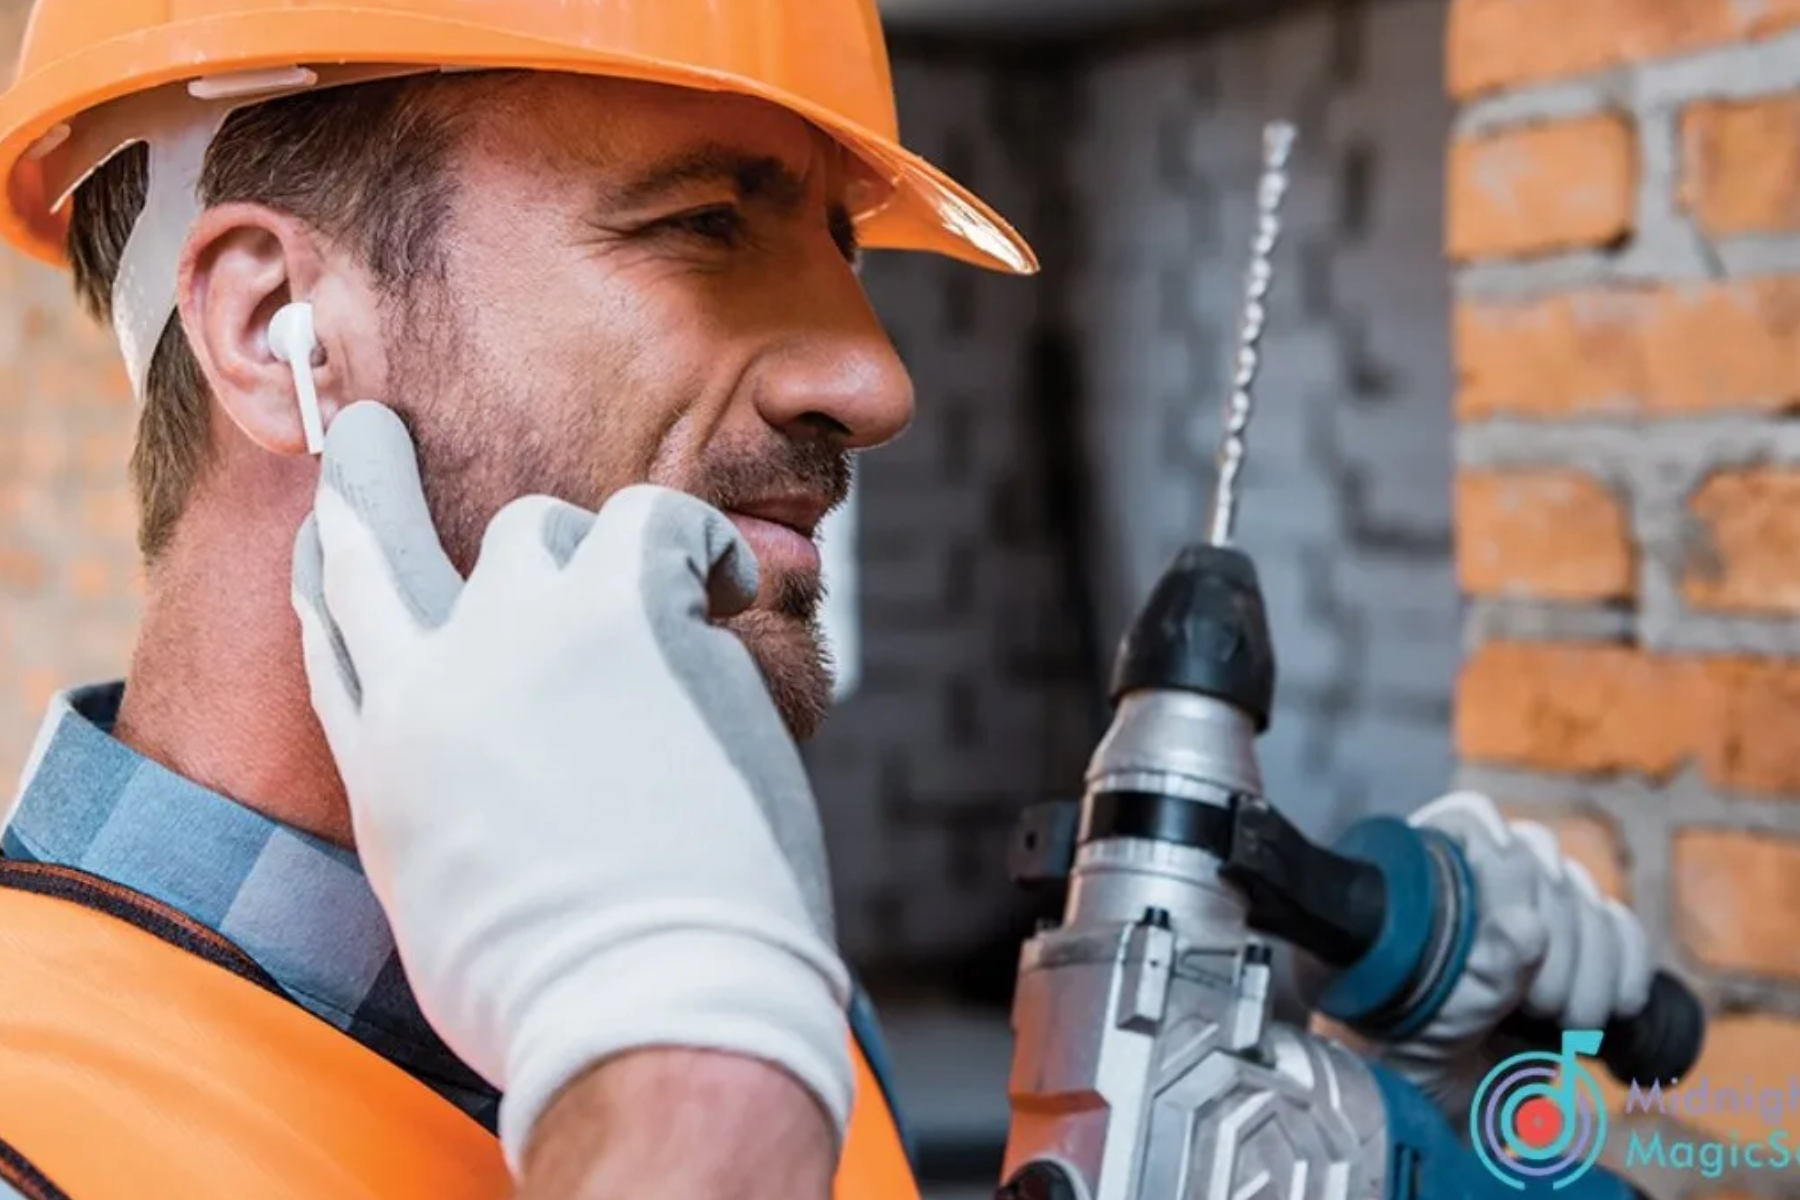 Best Bluetooth Earbuds For Construction Workers - The Sound Of Safety